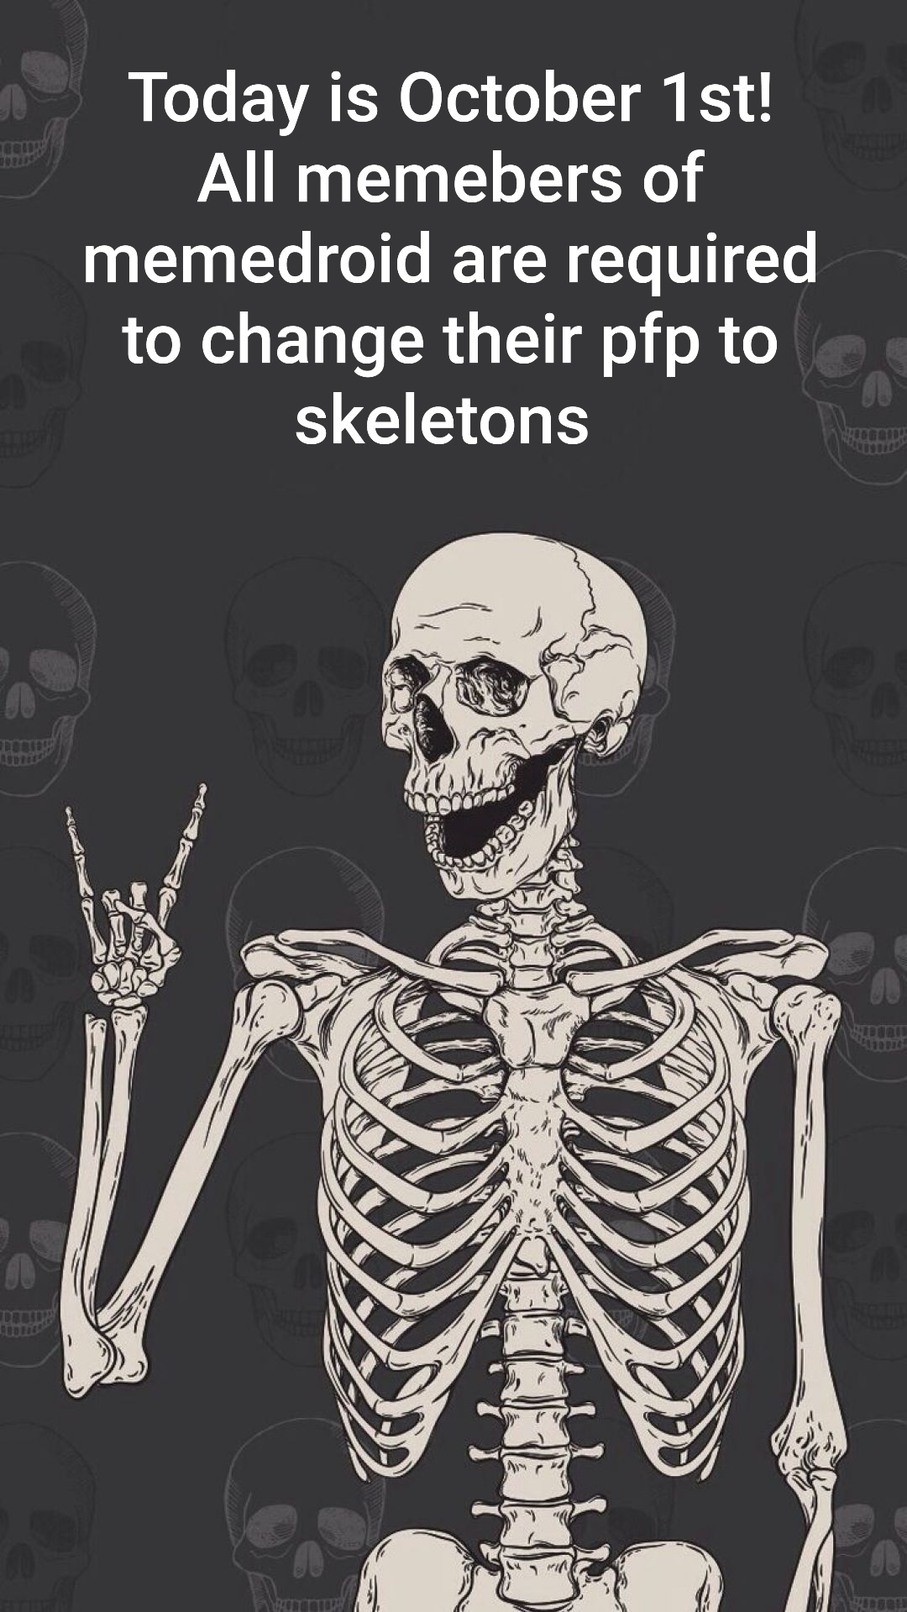 Y'all need to change it to skeletons pfp - Meme by BBR :) Memedroid